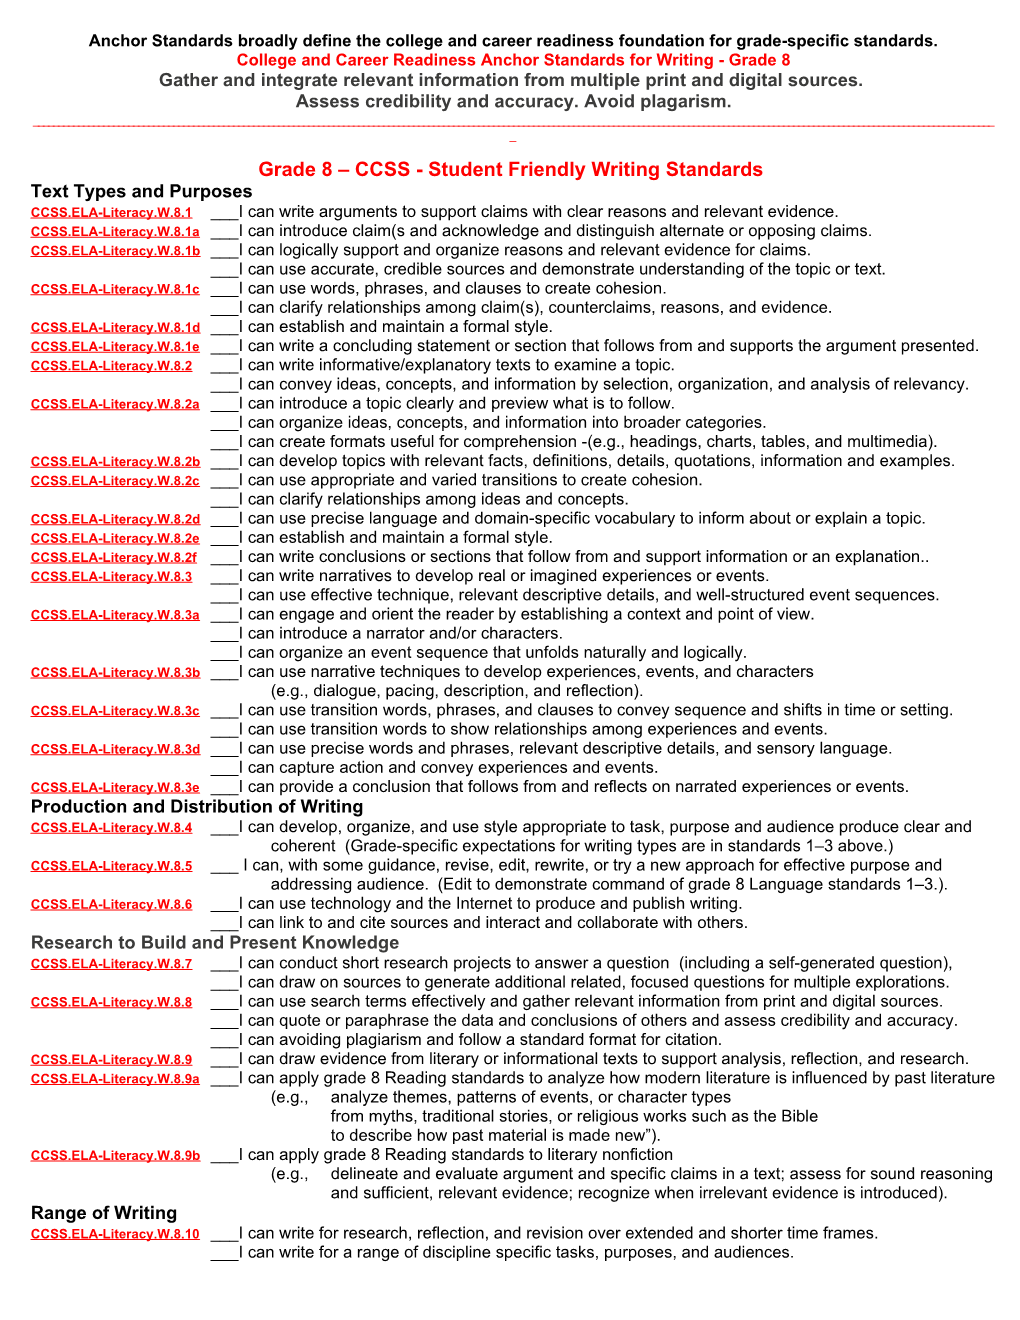 English Language Arts Standards College and Career Readiness Anchor Standards for Writing 8